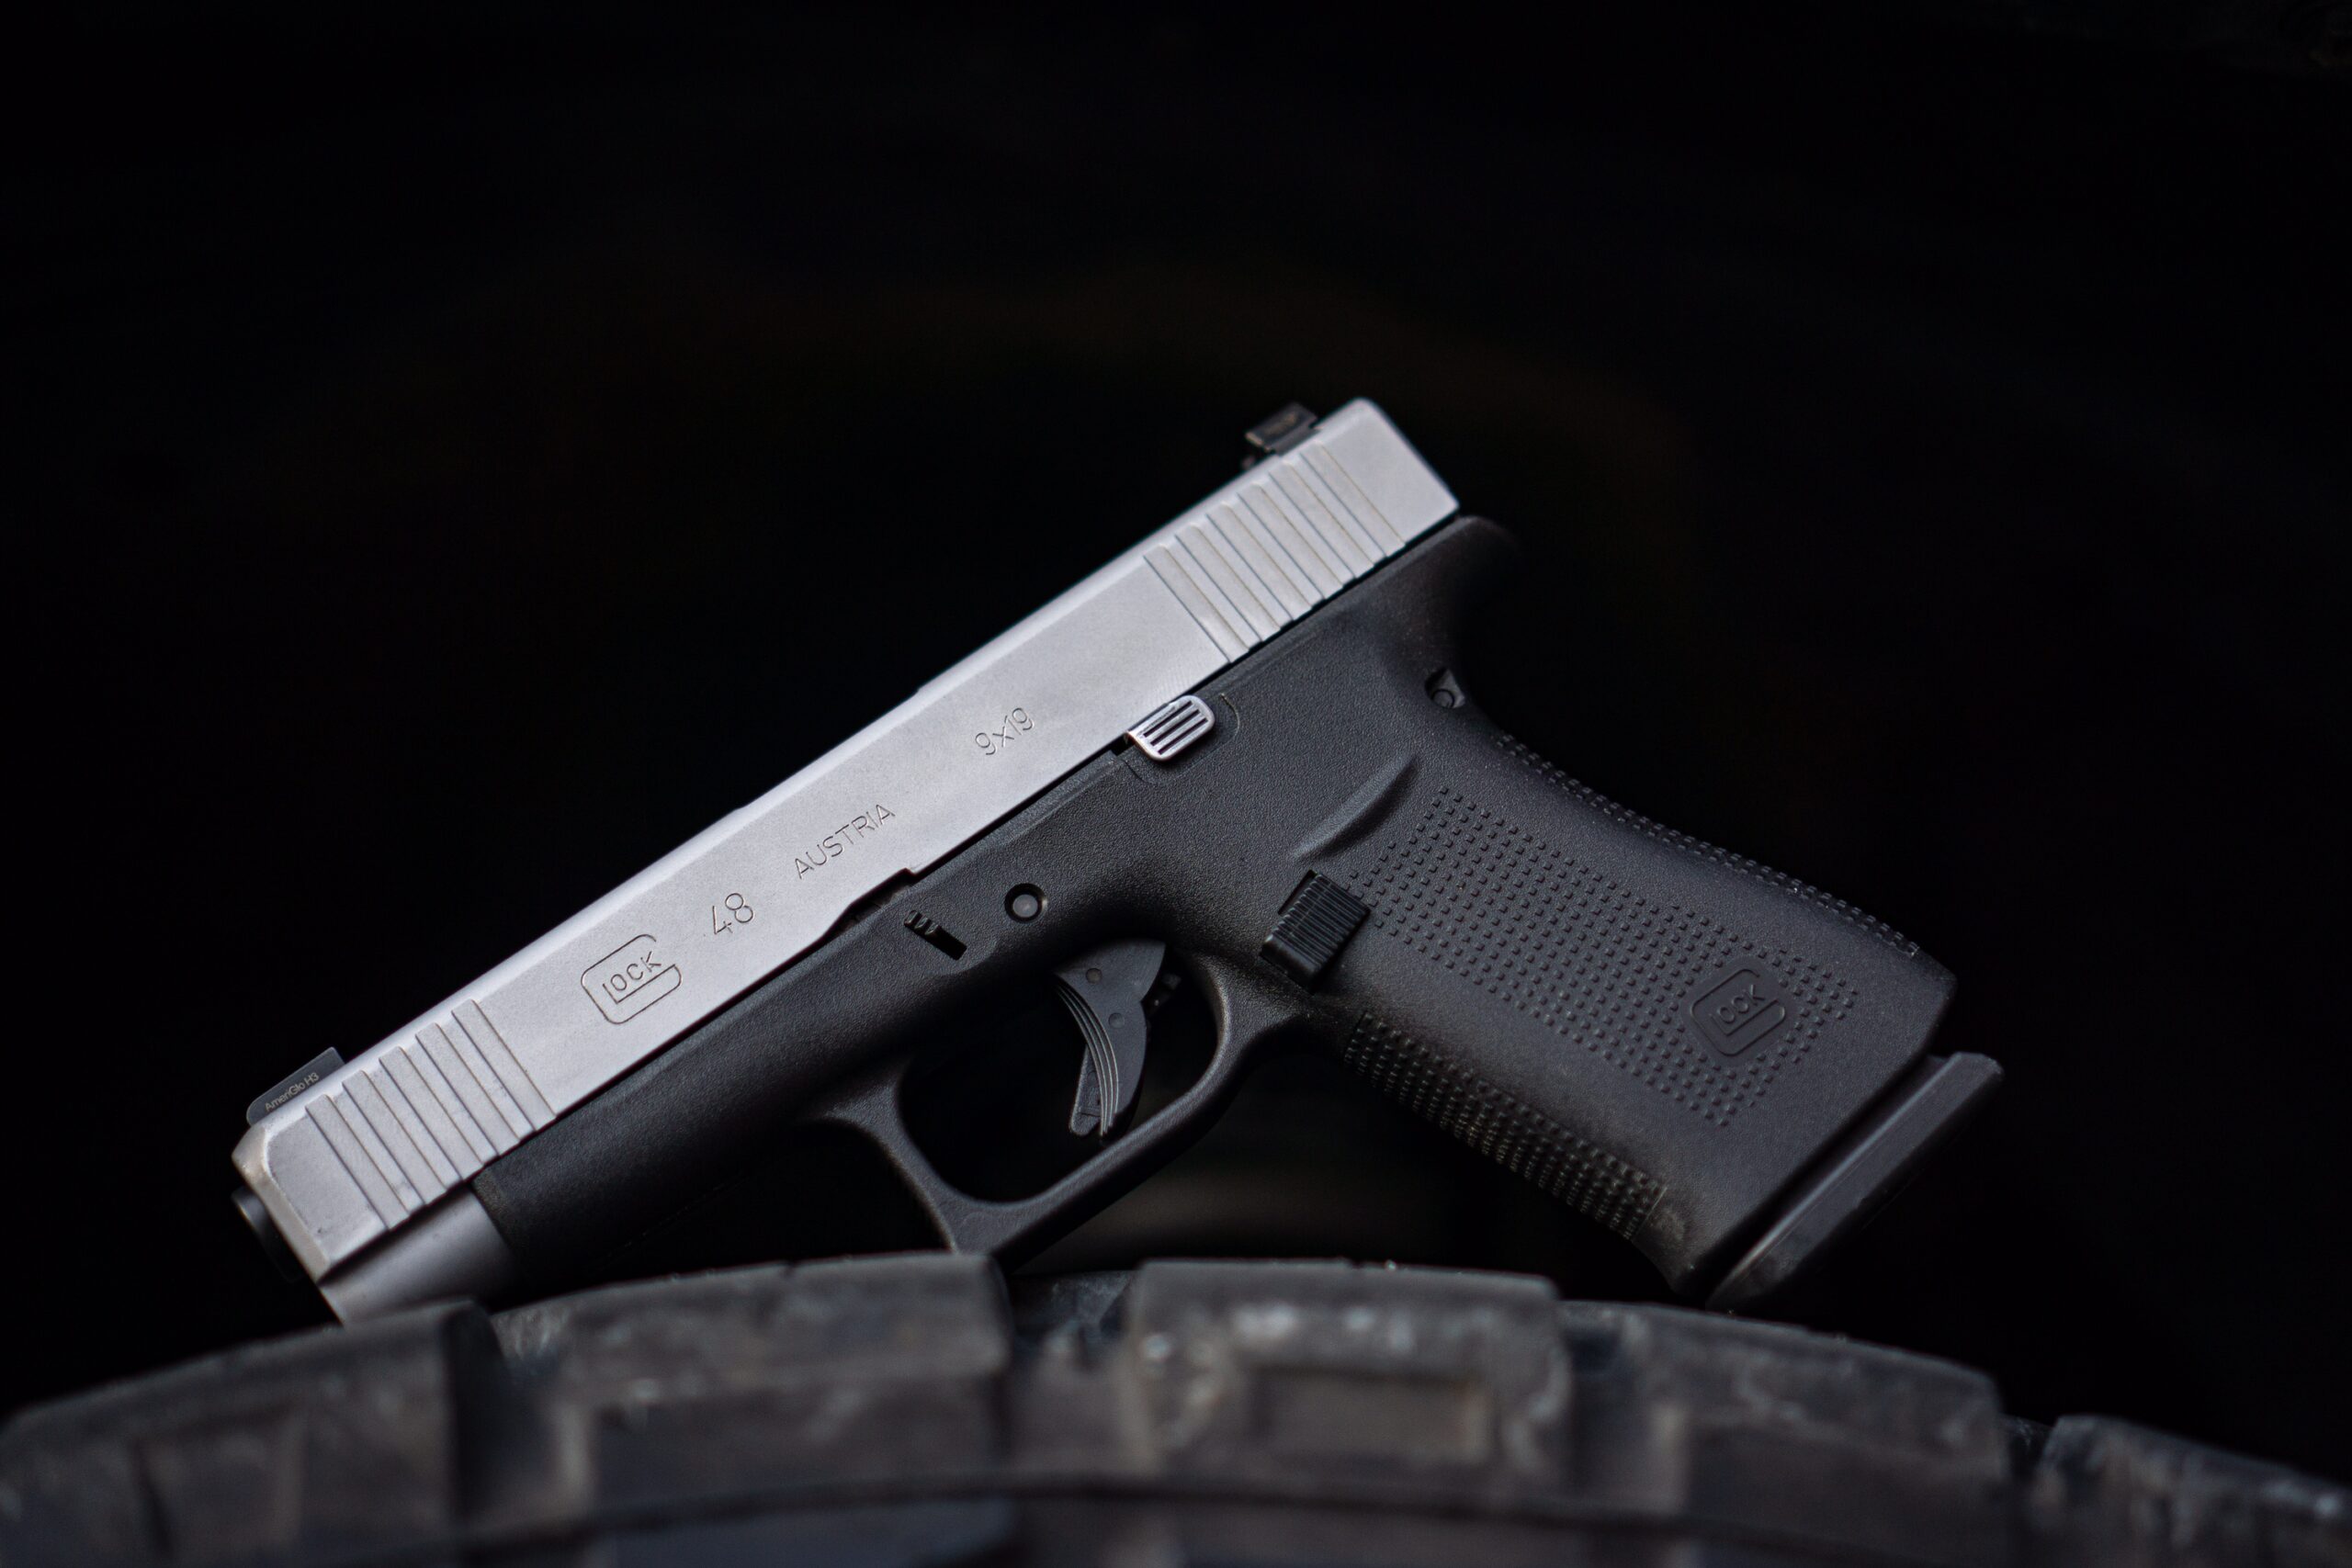 Glock 48 pistol used in our range review